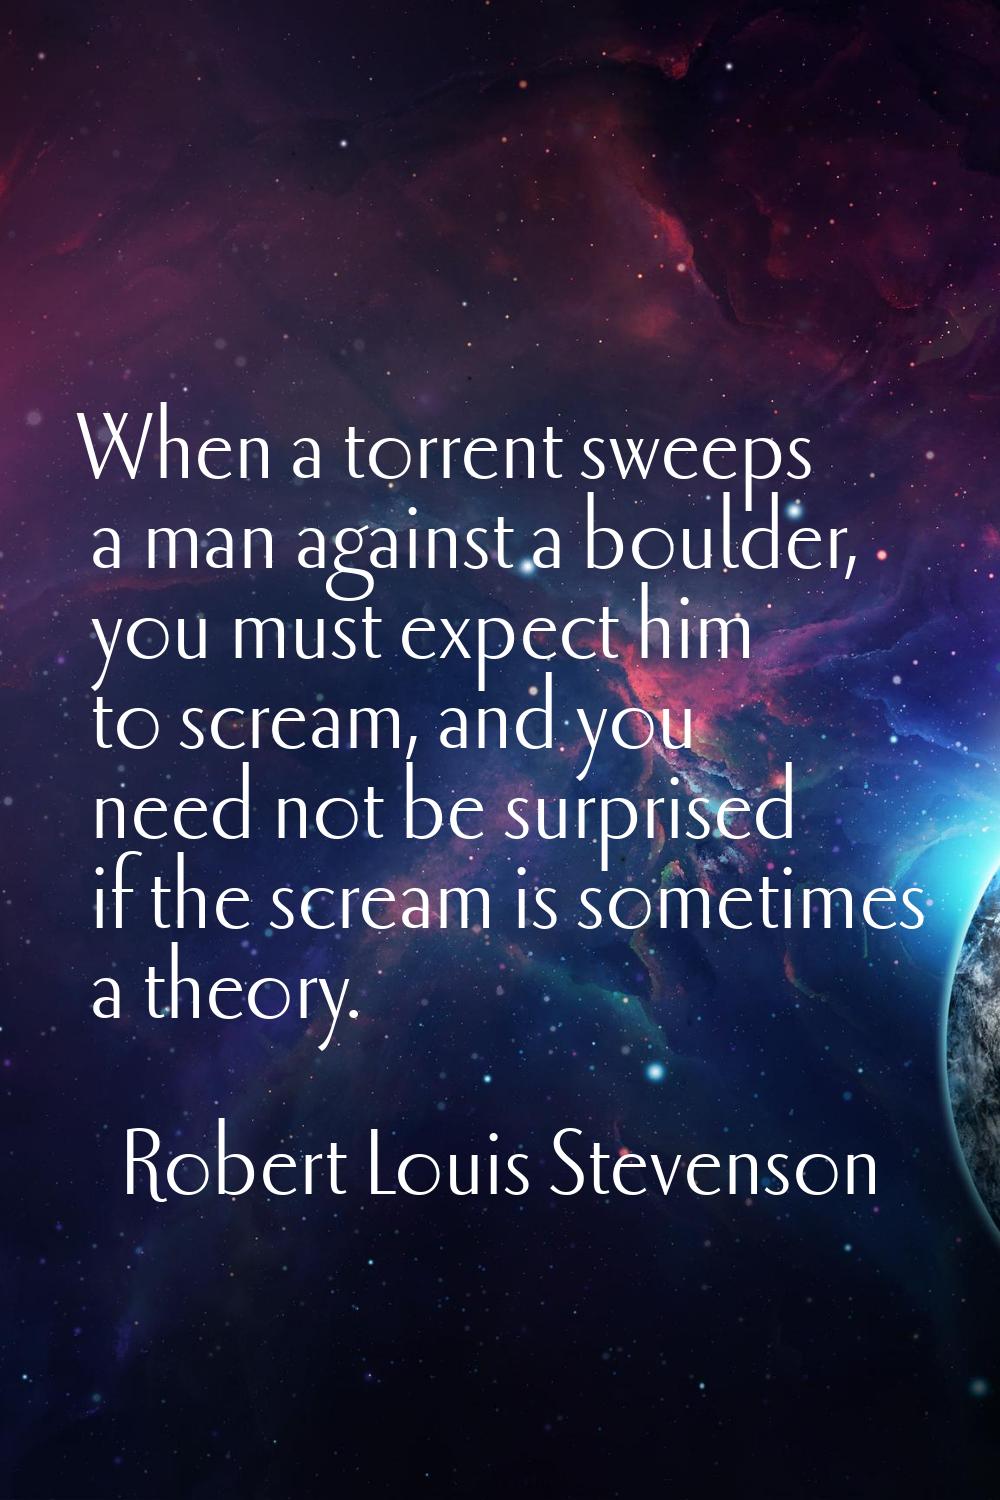 When a torrent sweeps a man against a boulder, you must expect him to scream, and you need not be s